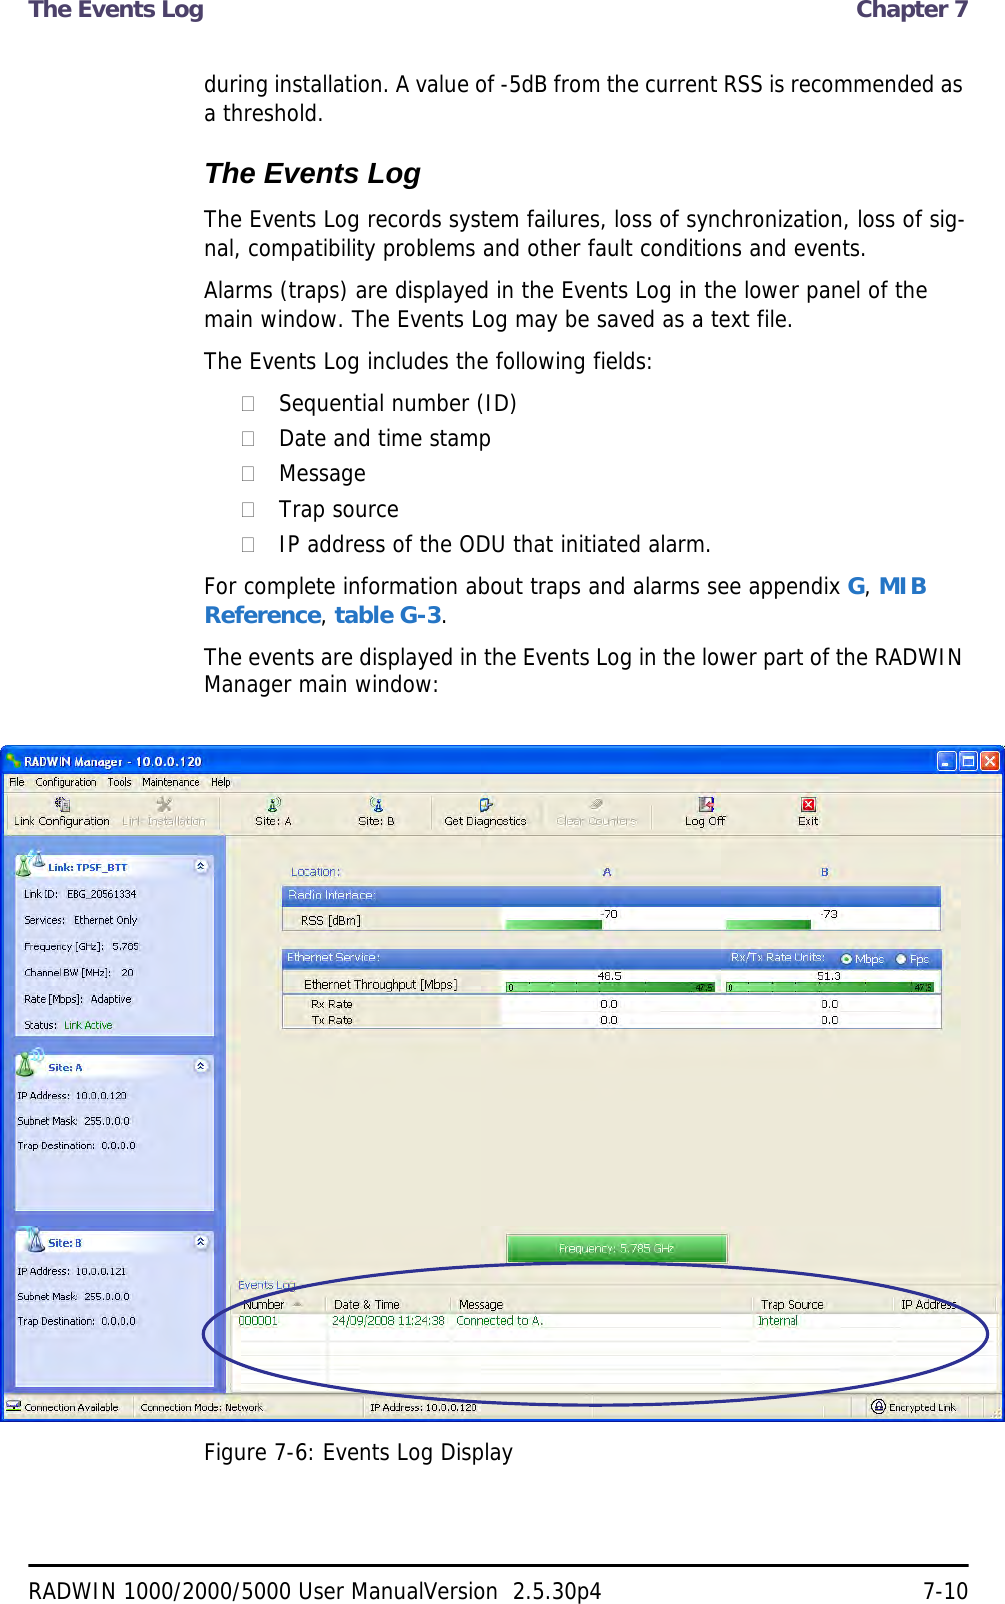 The Events Log  Chapter 7RADWIN 1000/2000/5000 User ManualVersion  2.5.30p4 7-10during installation. A value of -5dB from the current RSS is recommended as a threshold.The Events LogThe Events Log records system failures, loss of synchronization, loss of sig-nal, compatibility problems and other fault conditions and events.Alarms (traps) are displayed in the Events Log in the lower panel of the main window. The Events Log may be saved as a text file.The Events Log includes the following fields:Sequential number (ID)Date and time stampMessageTrap sourceIP address of the ODU that initiated alarm.For complete information about traps and alarms see appendix G, MIB Reference, table G-3.The events are displayed in the Events Log in the lower part of the RADWIN Manager main window:Figure 7-6: Events Log Display